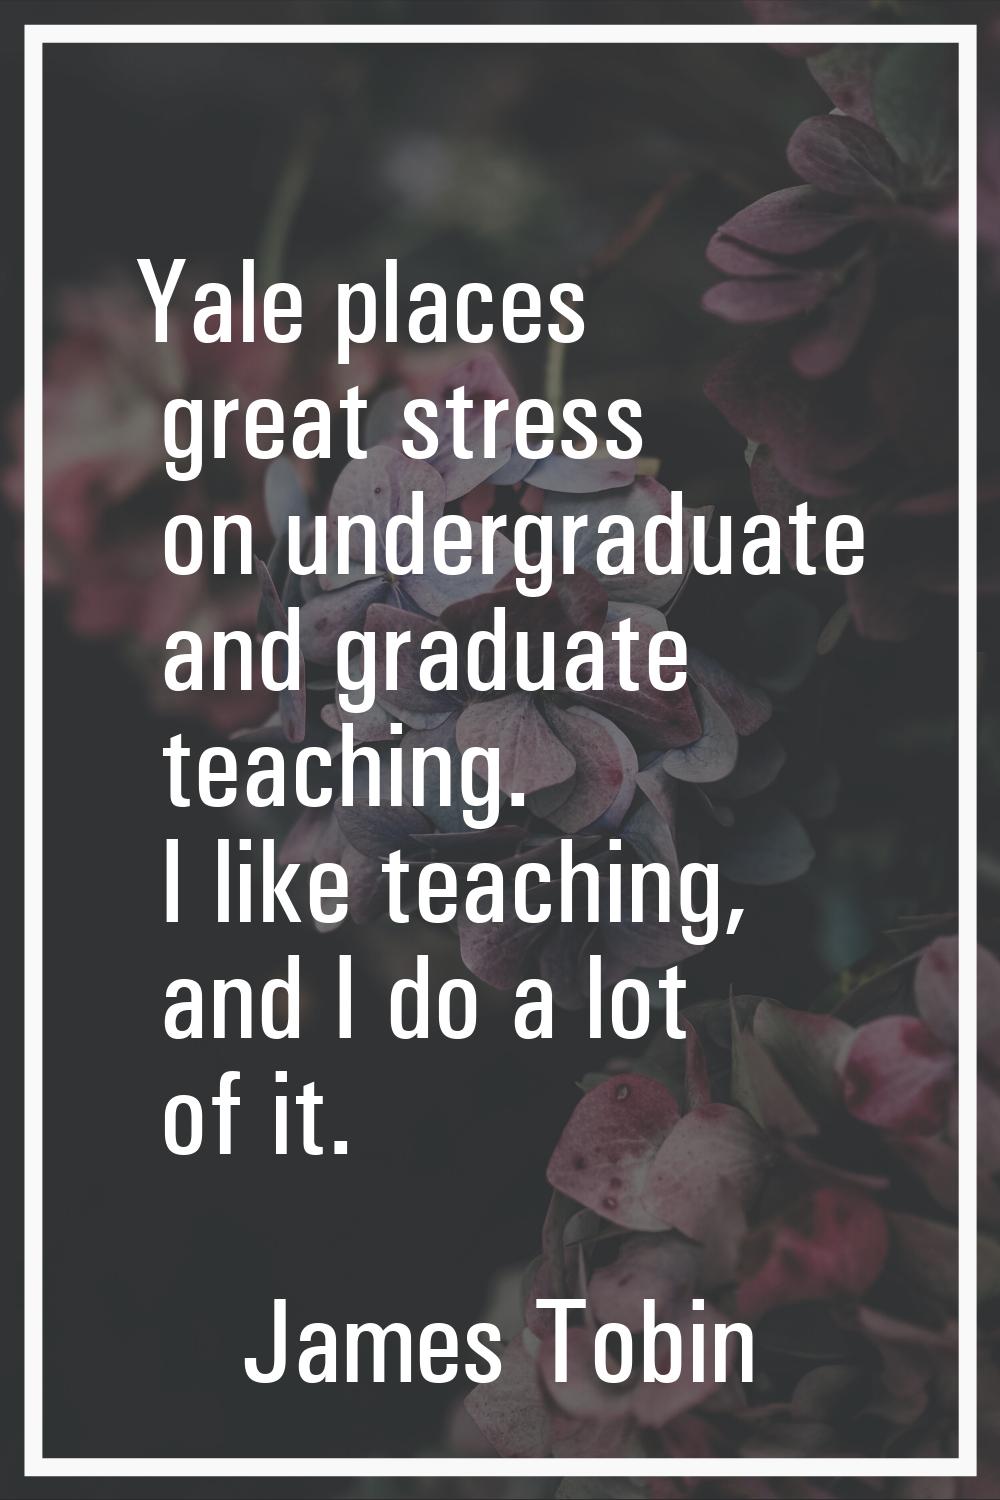 Yale places great stress on undergraduate and graduate teaching. I like teaching, and I do a lot of